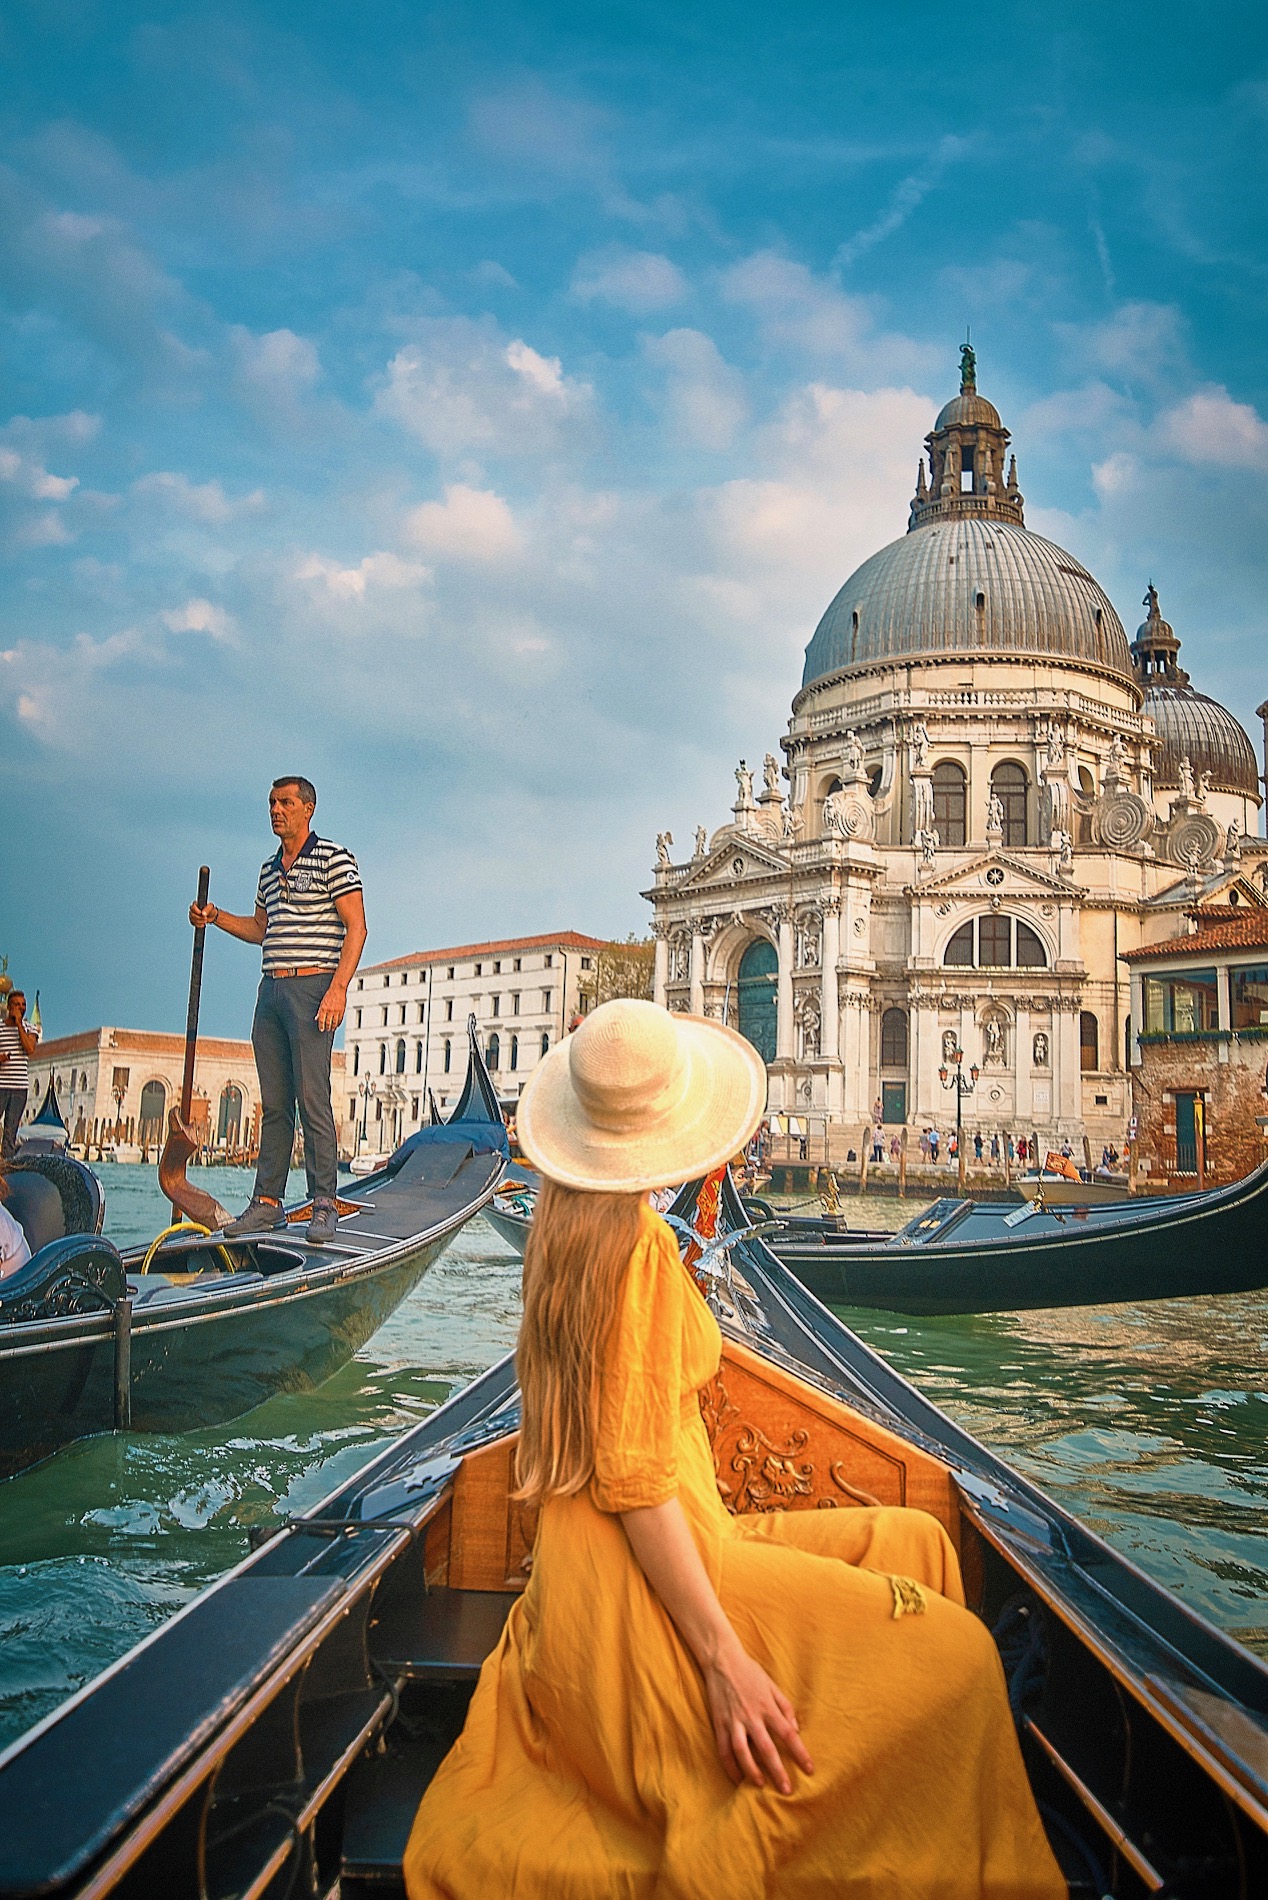 Woman in a yellow dress and hat sitting in a gondola on the Grand Canal.